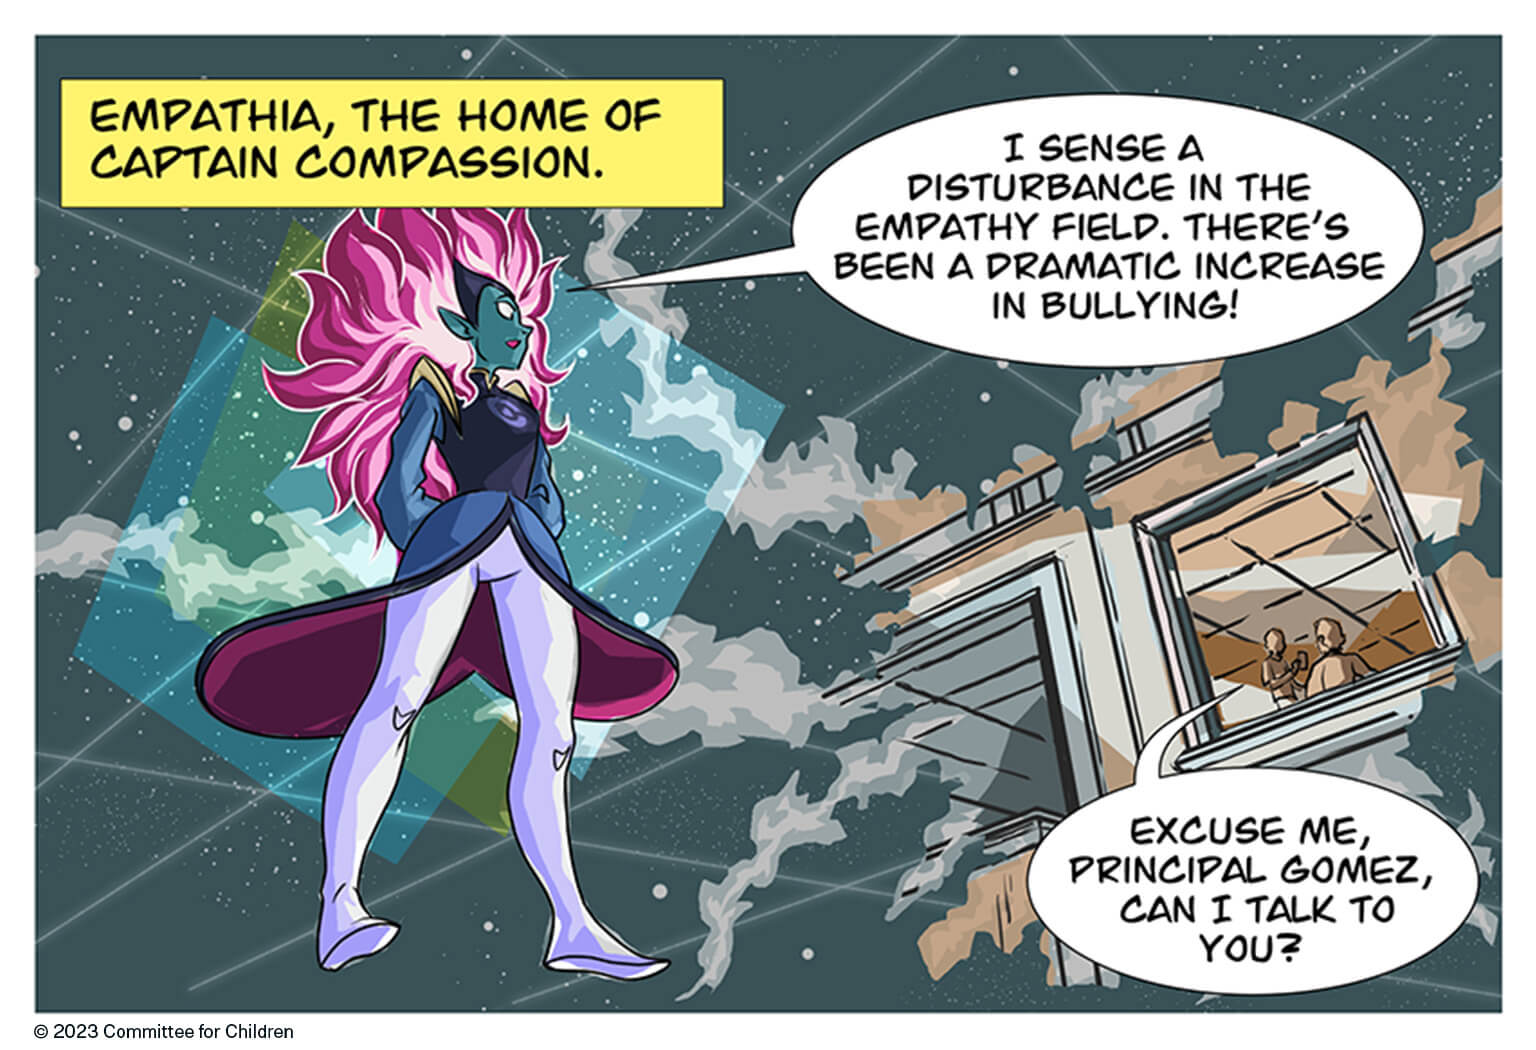 Captain Compassion® is shown on a faraway planet. She has fiery pink hair and teal skin and is wearing a blue and purple superhero outfit. Captain Compassion sees a bullying problem starting on Earth.